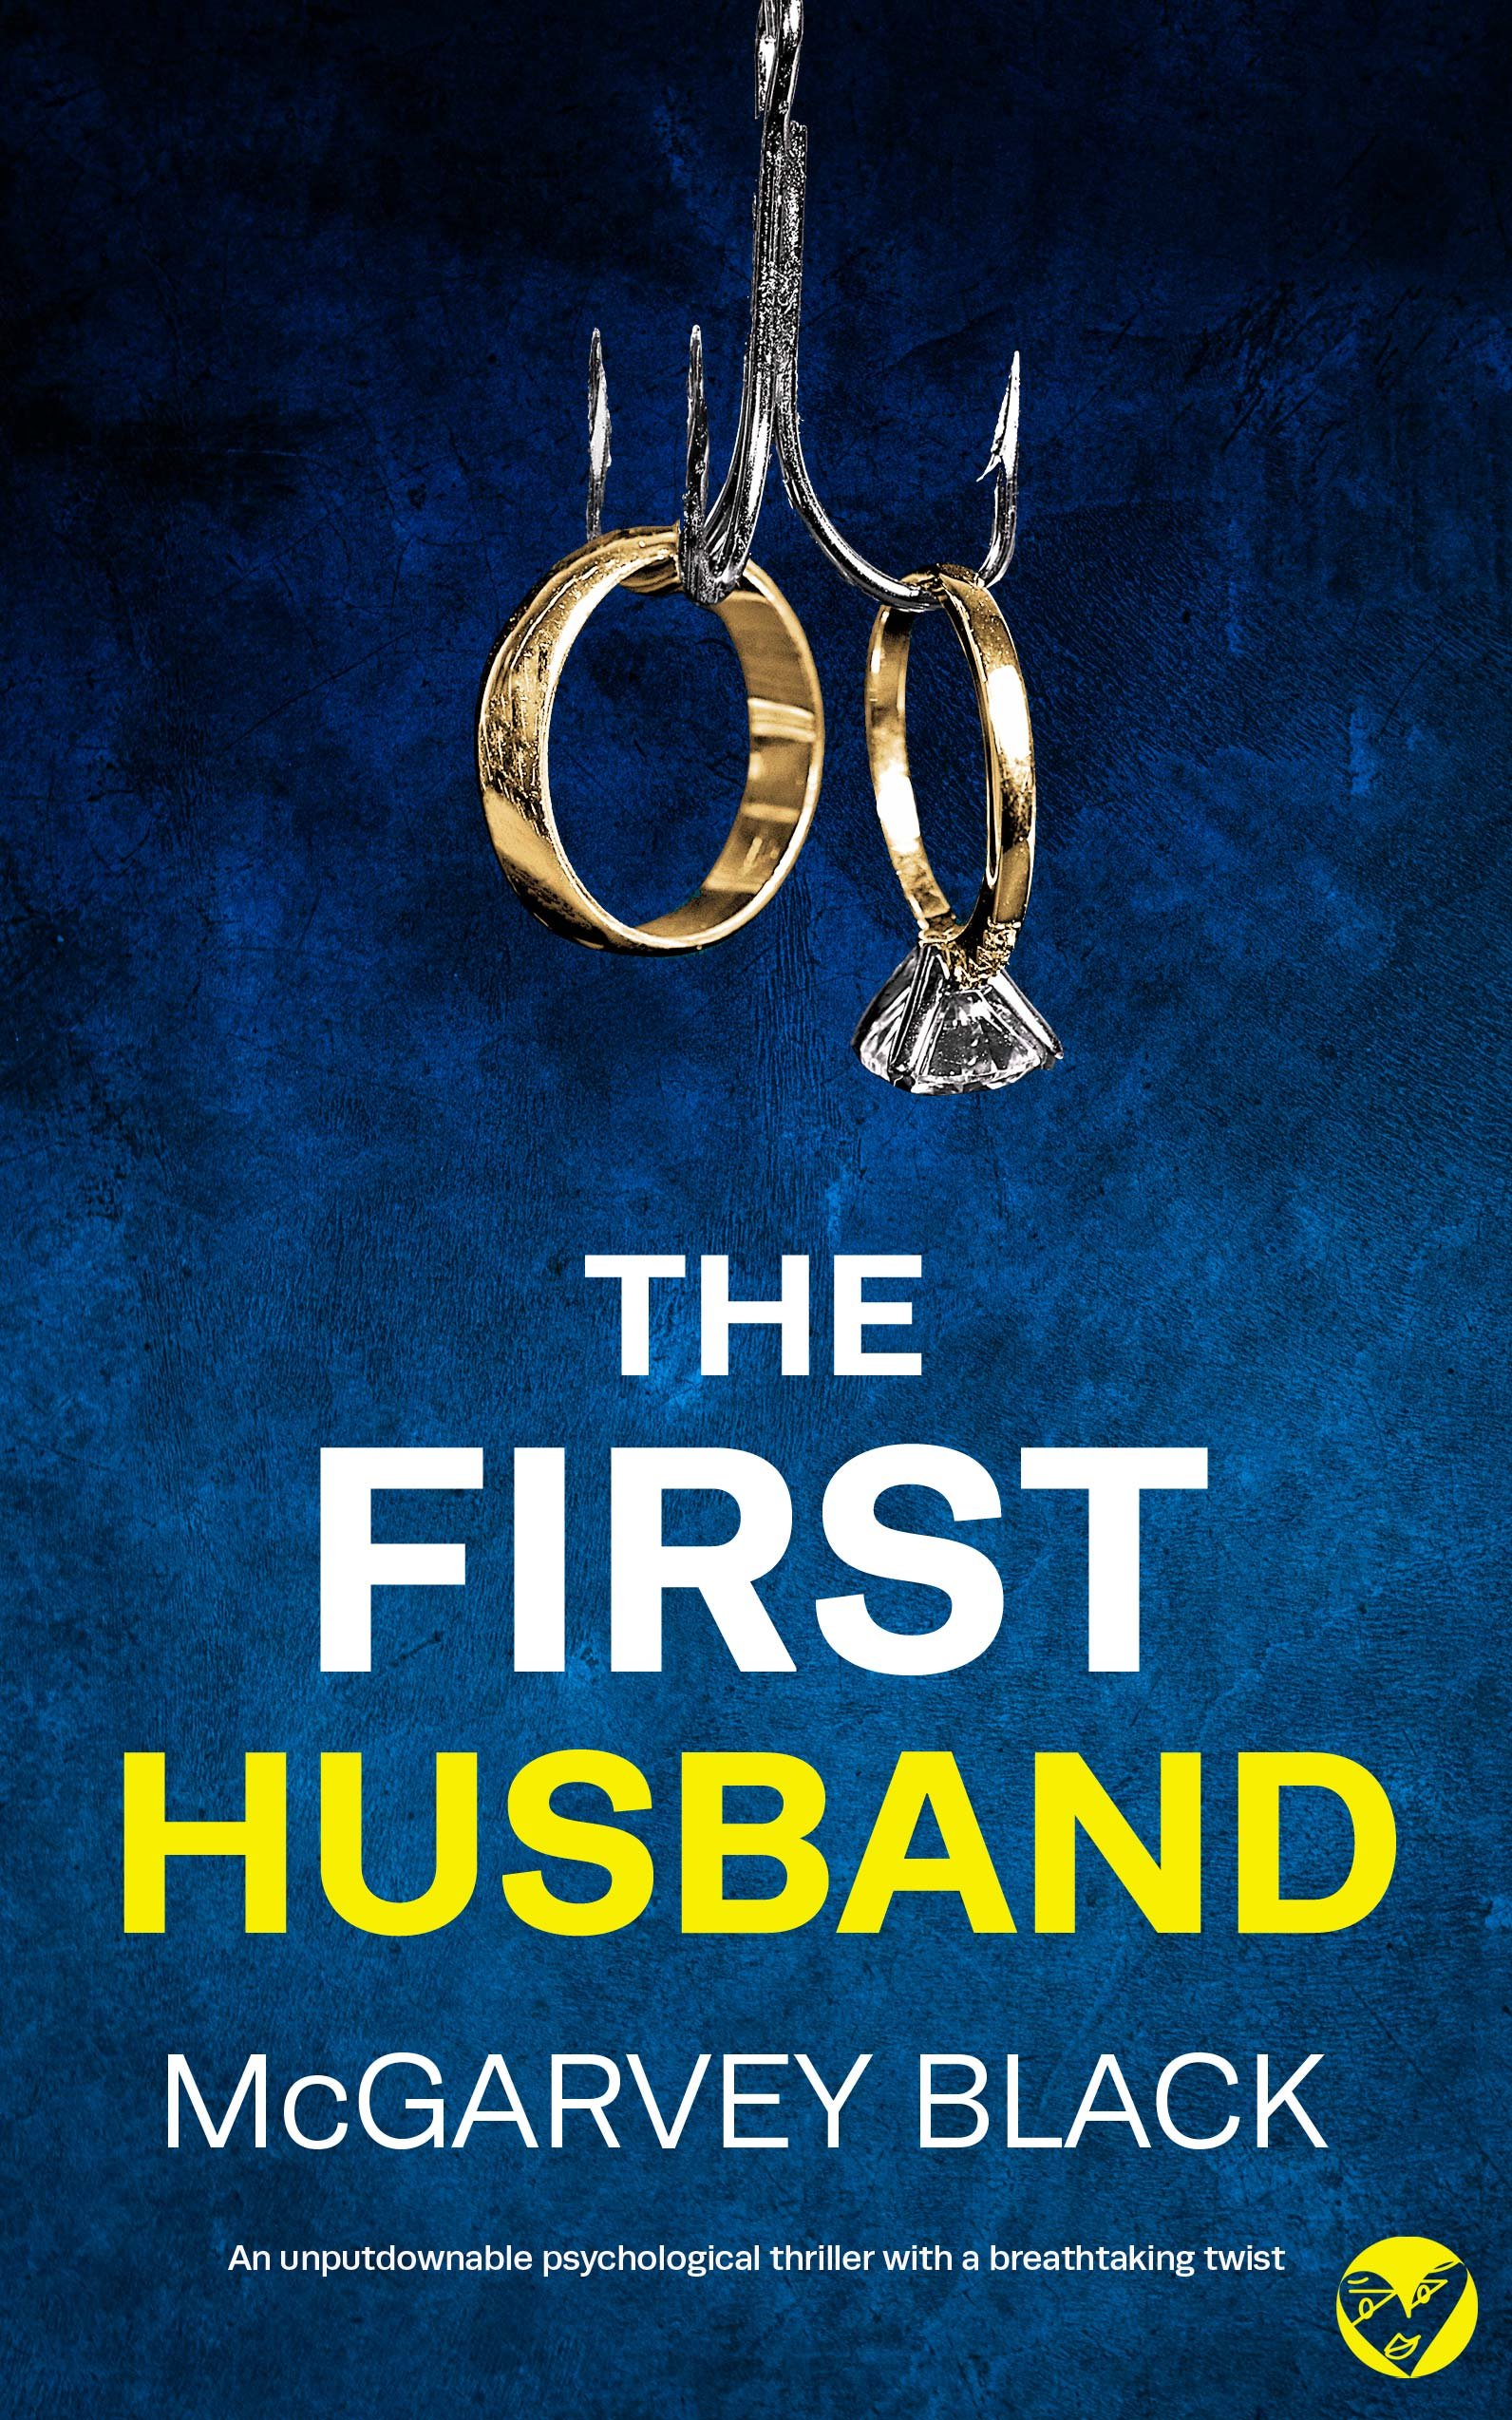 THE FIRST HUSBAND 625k Cover publish.jpg